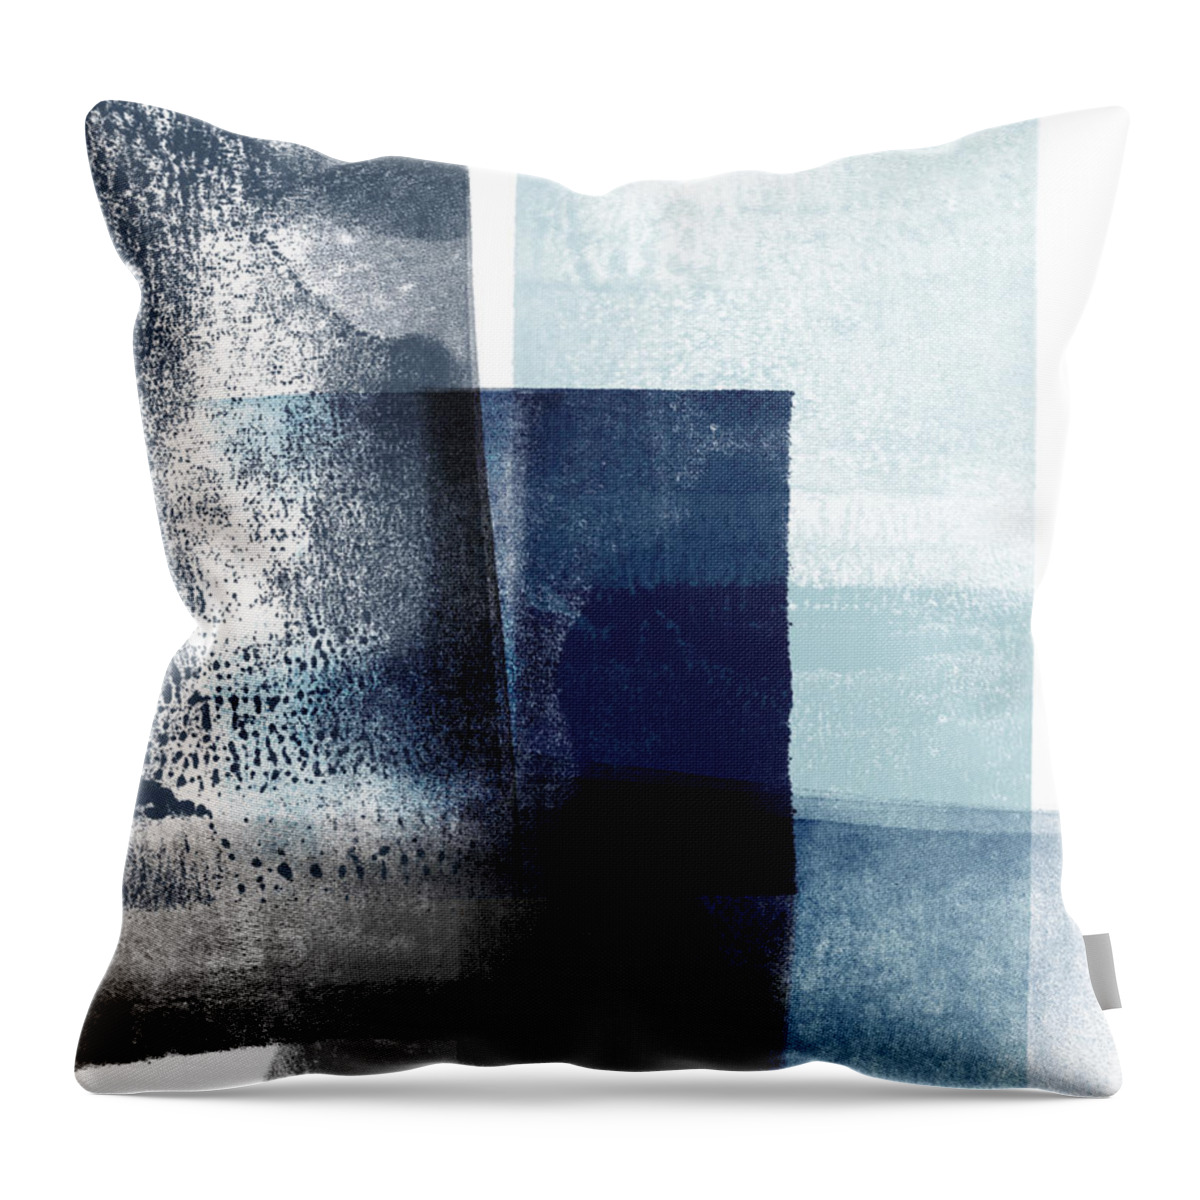 Blue Throw Pillow featuring the mixed media Mestro 4- Abstract Art by Linda Woods by Linda Woods